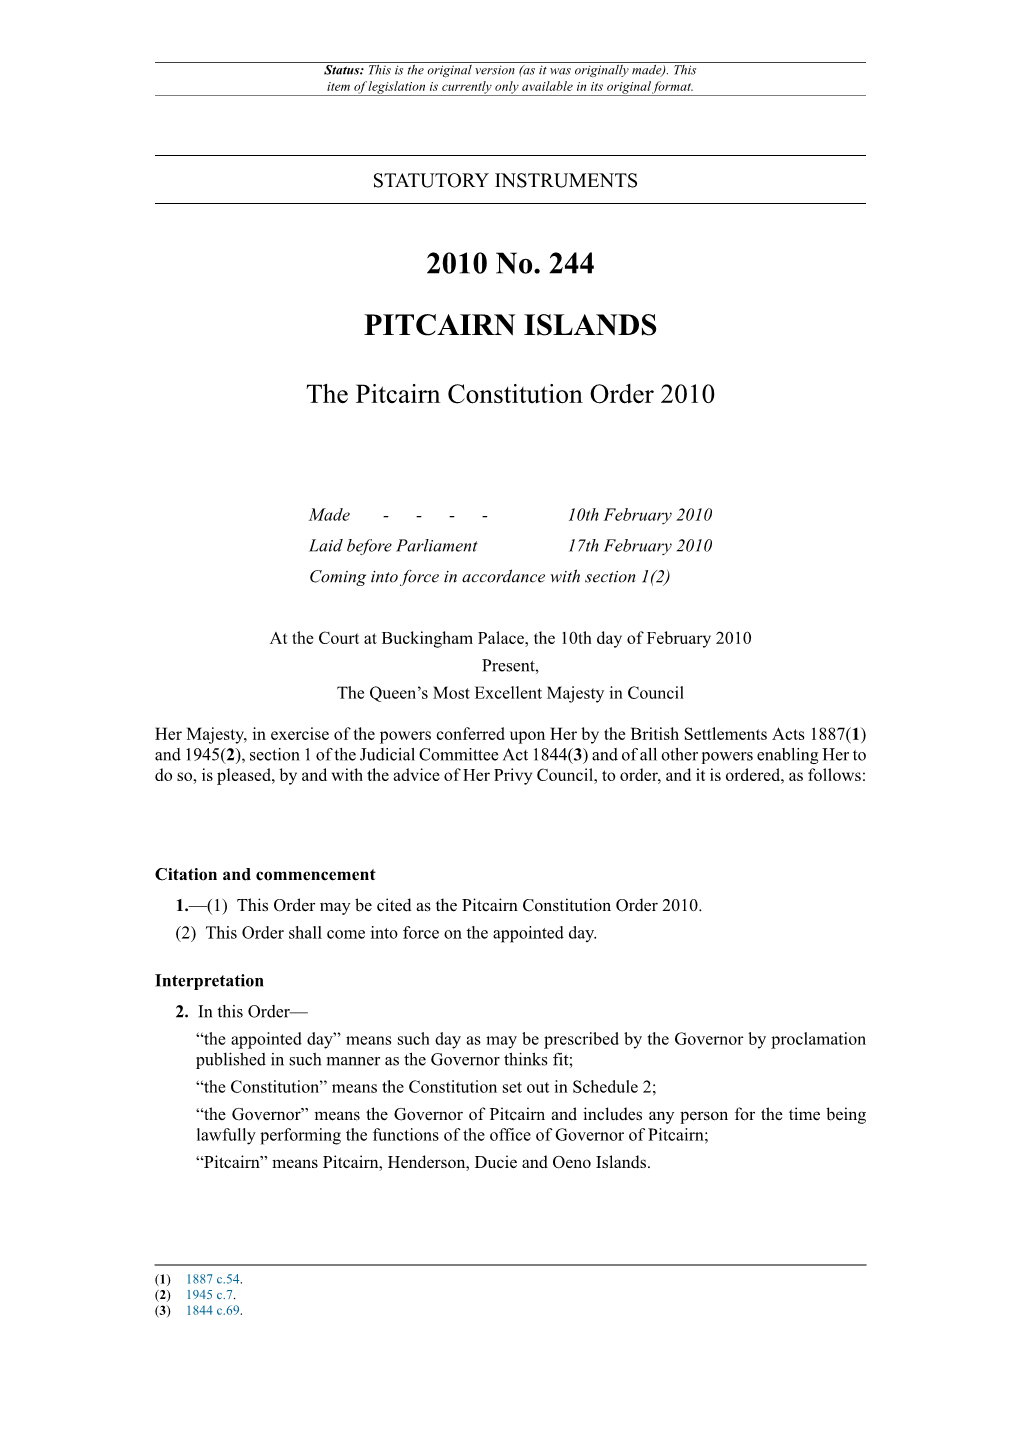 The Pitcairn Constitution Order 2010